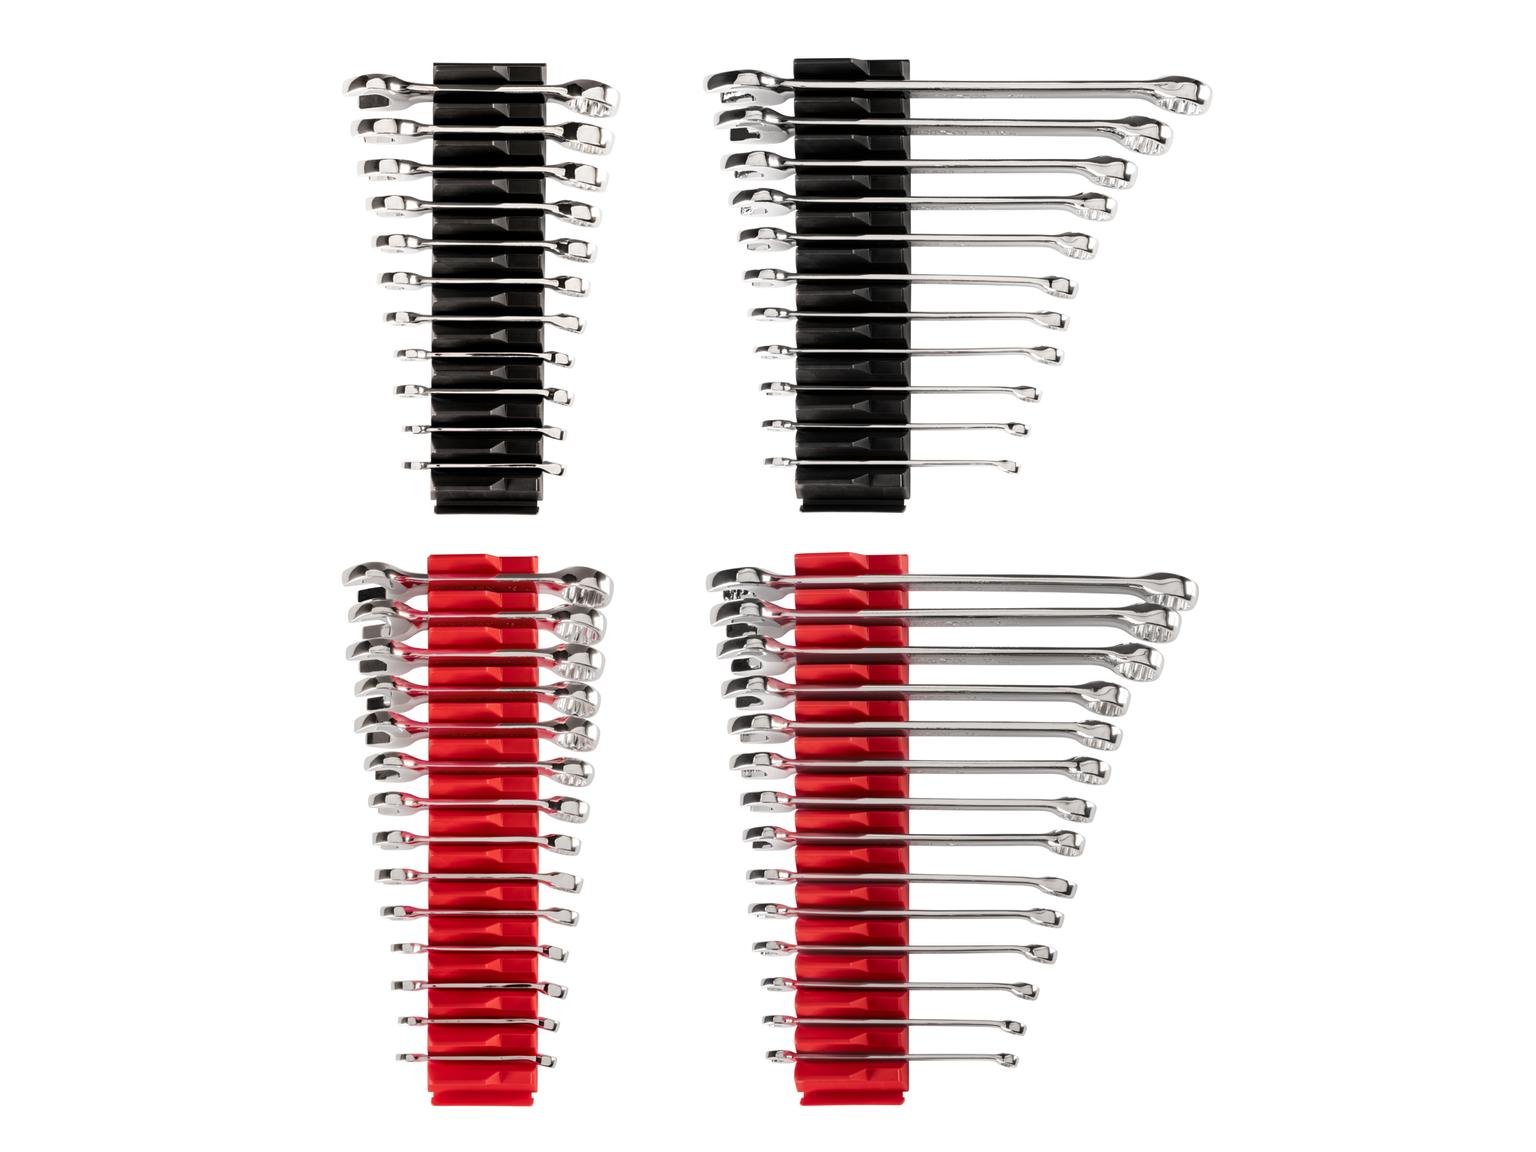 Stubby and Standard Length Combination Wrench Set, 50-Piece (Modular Wrench Organizer)